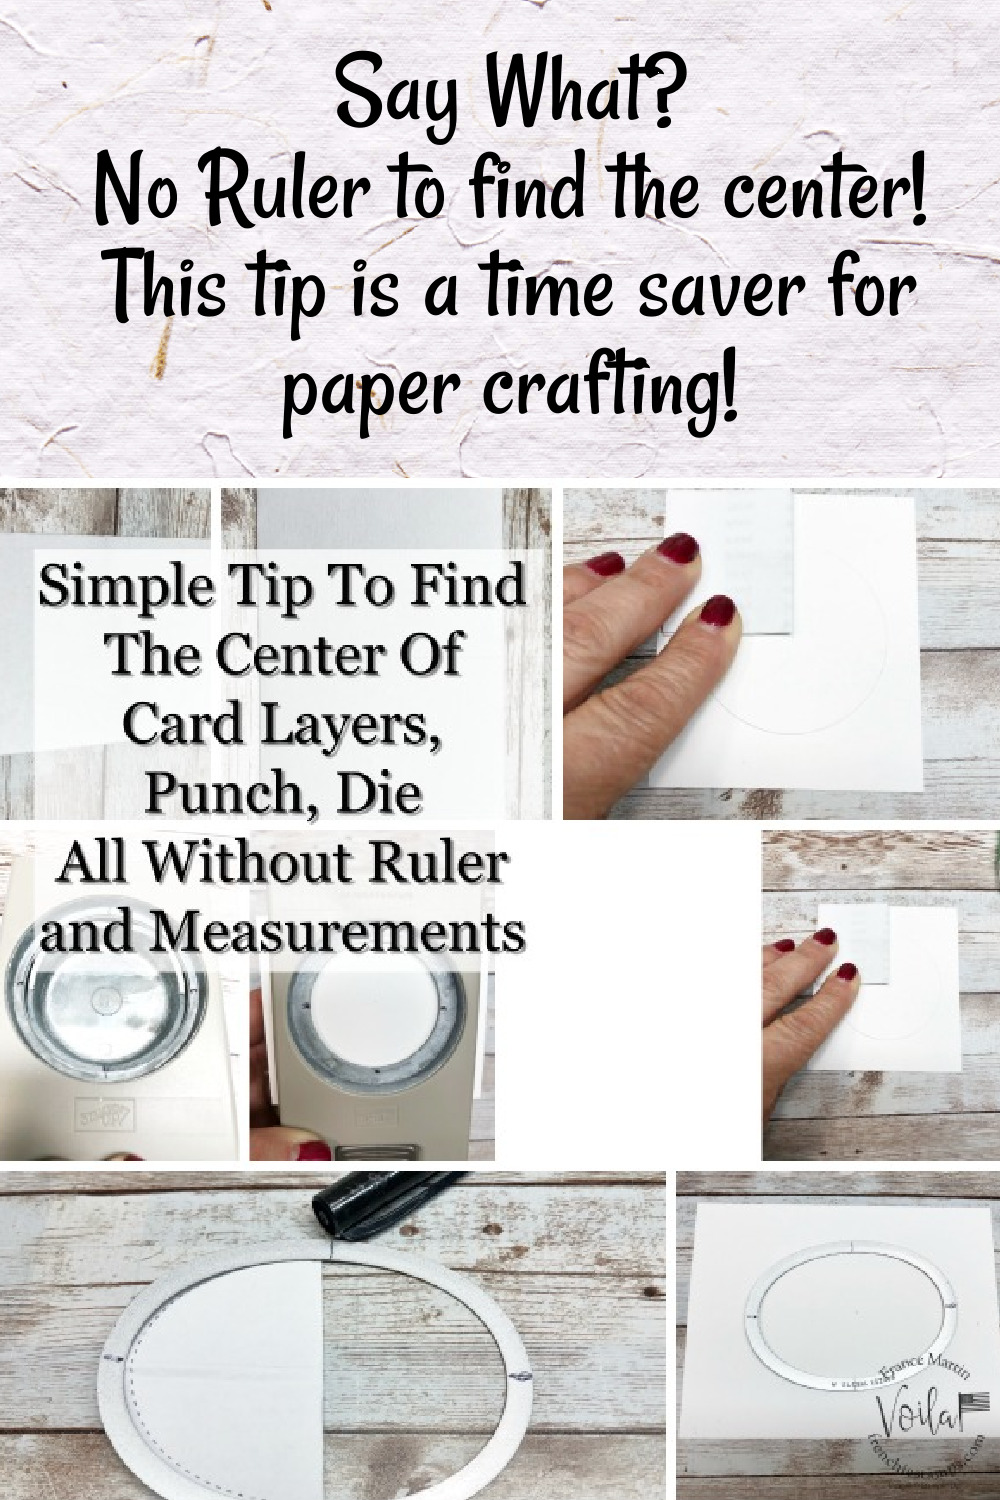 Great Tip To Find The Center Of Shapes and Cards Without A Ruler